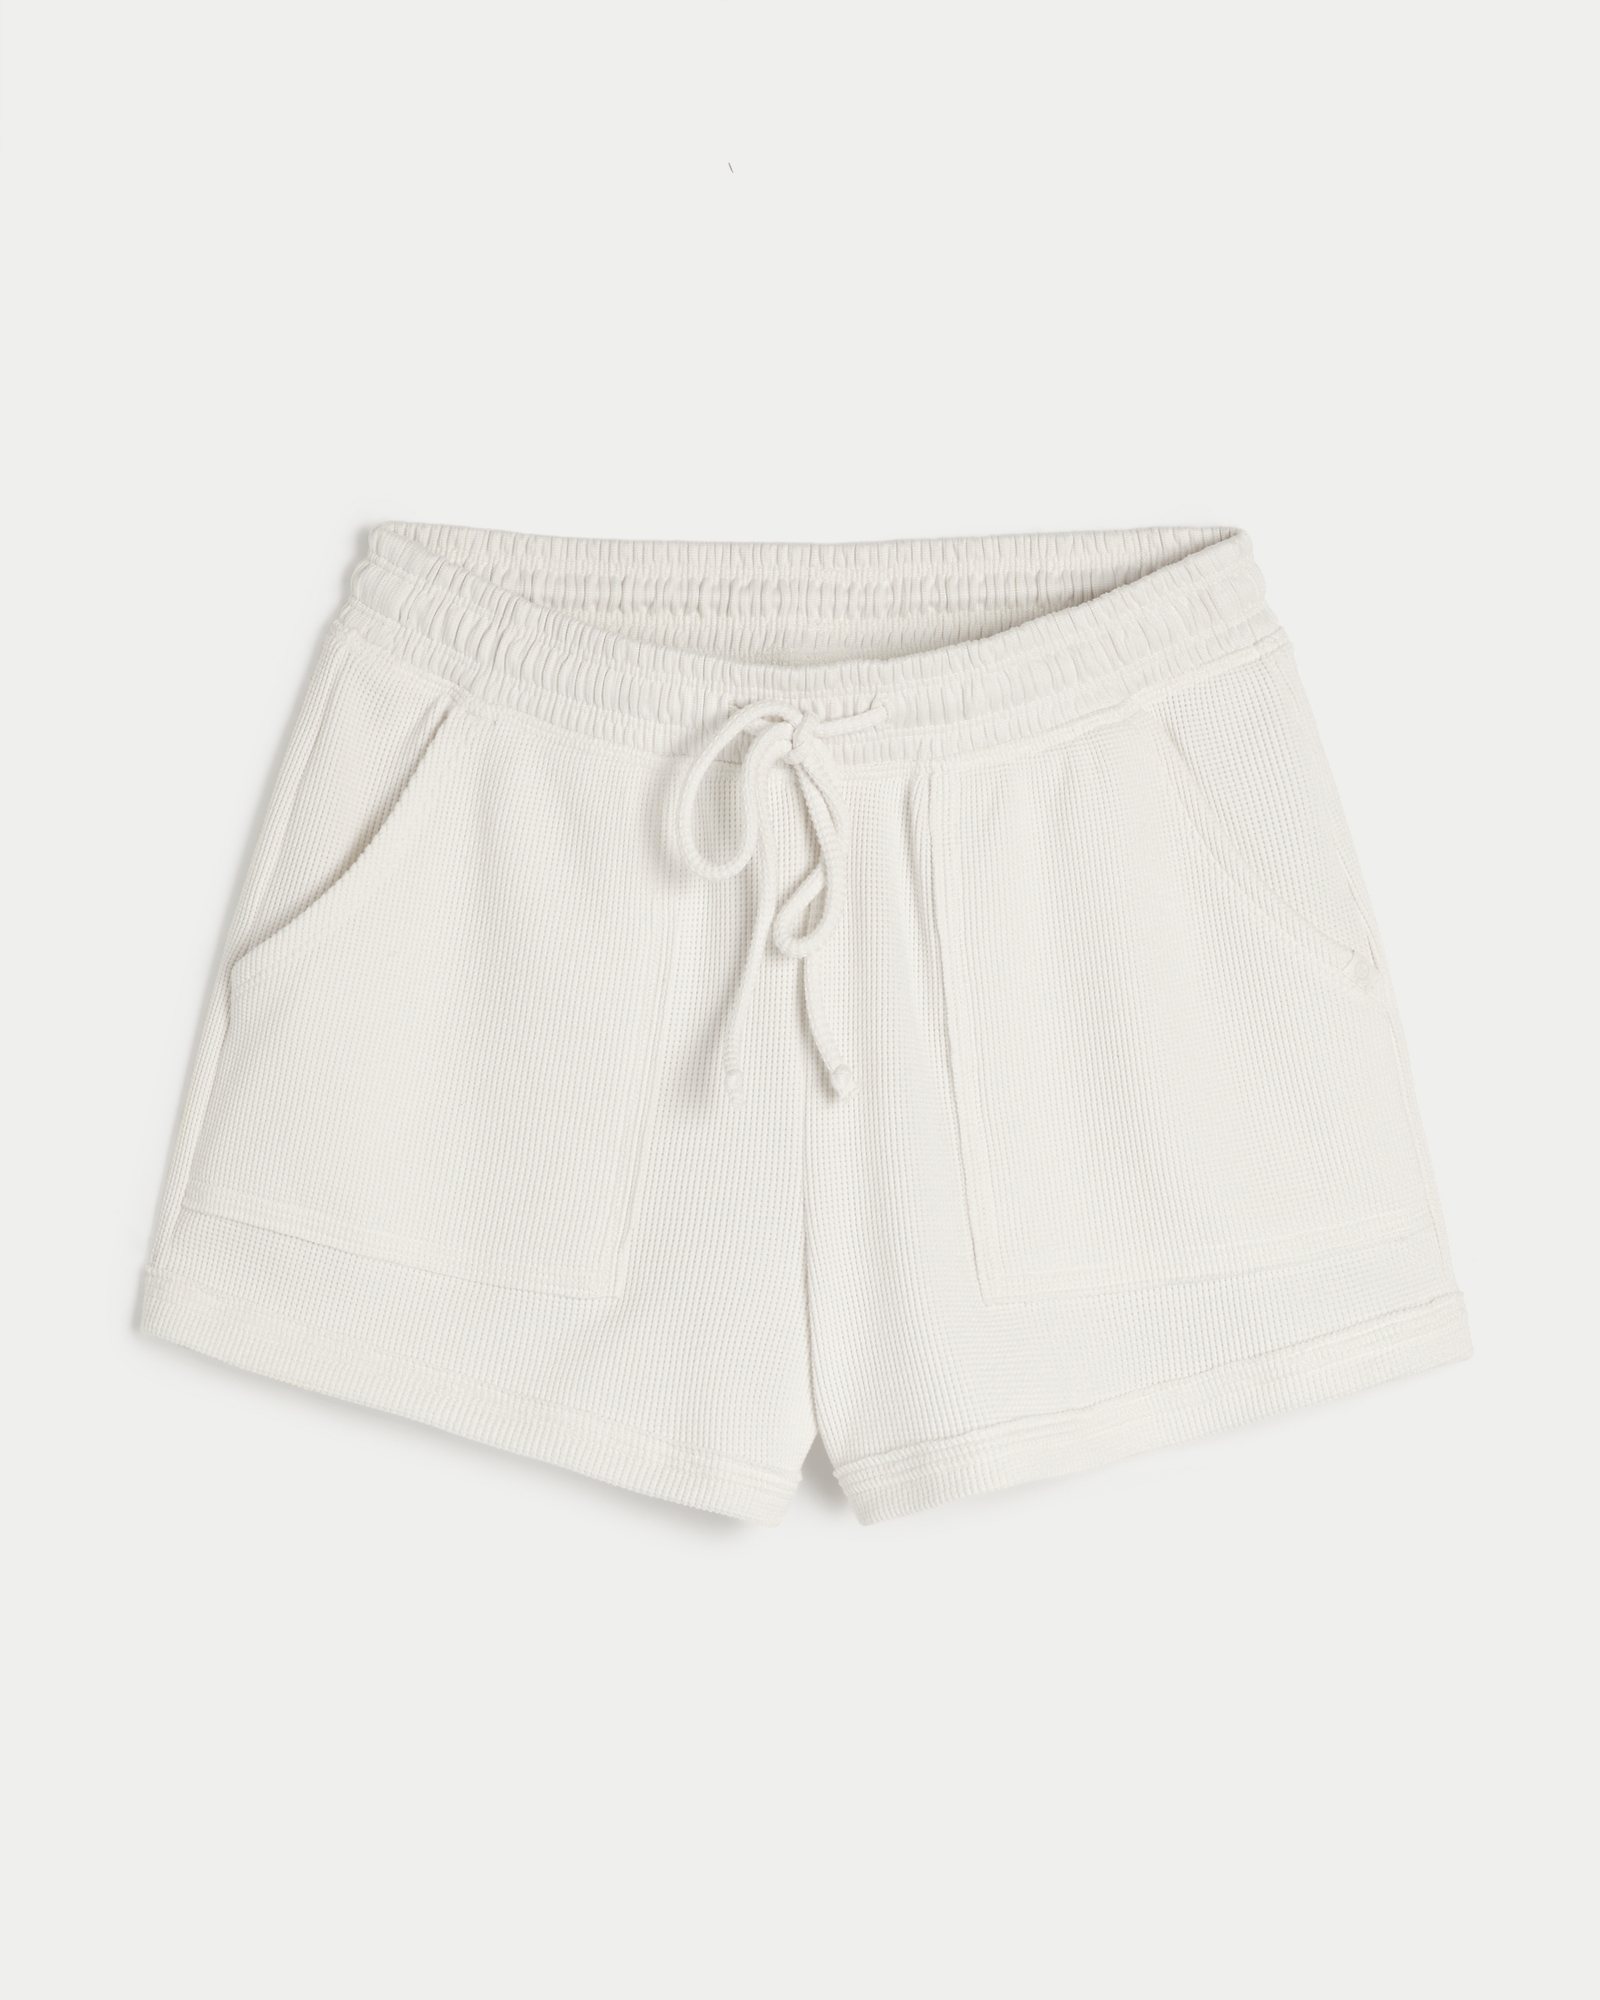 Women's Gilly Hicks Waffle Shorts, Women's Clearance